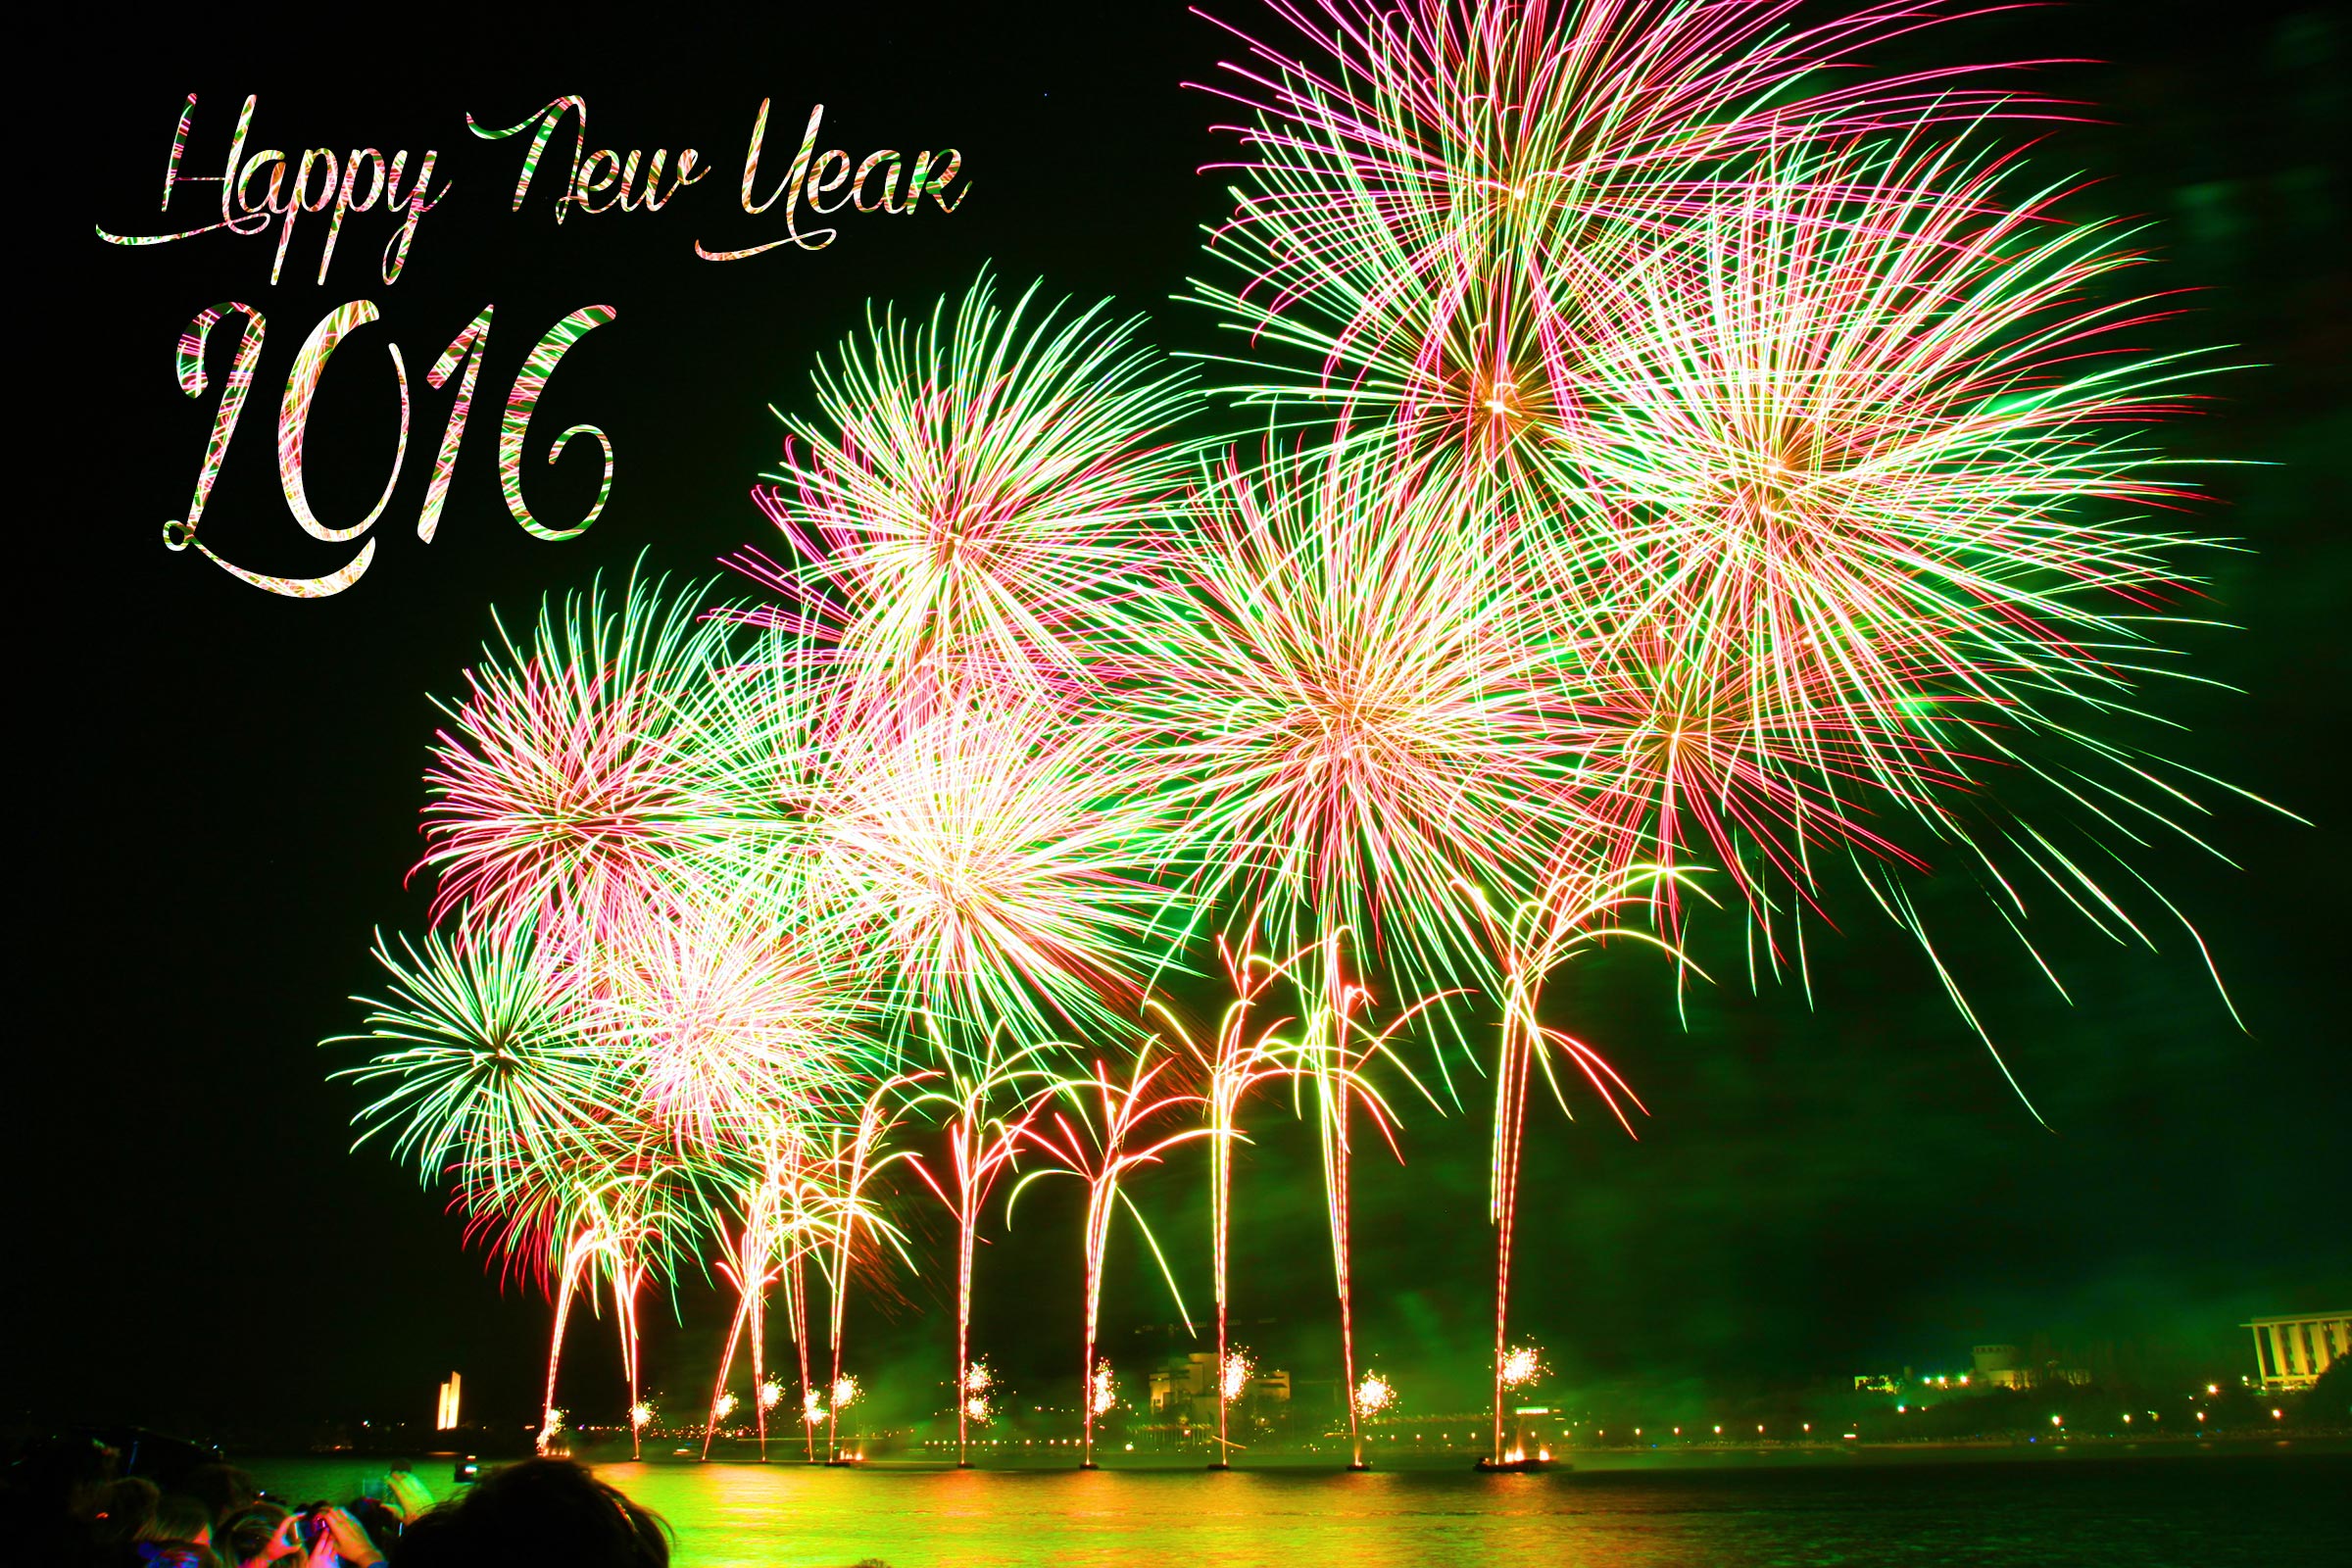 Happy New Year 2016 Wallpapers HD Images Cover photos